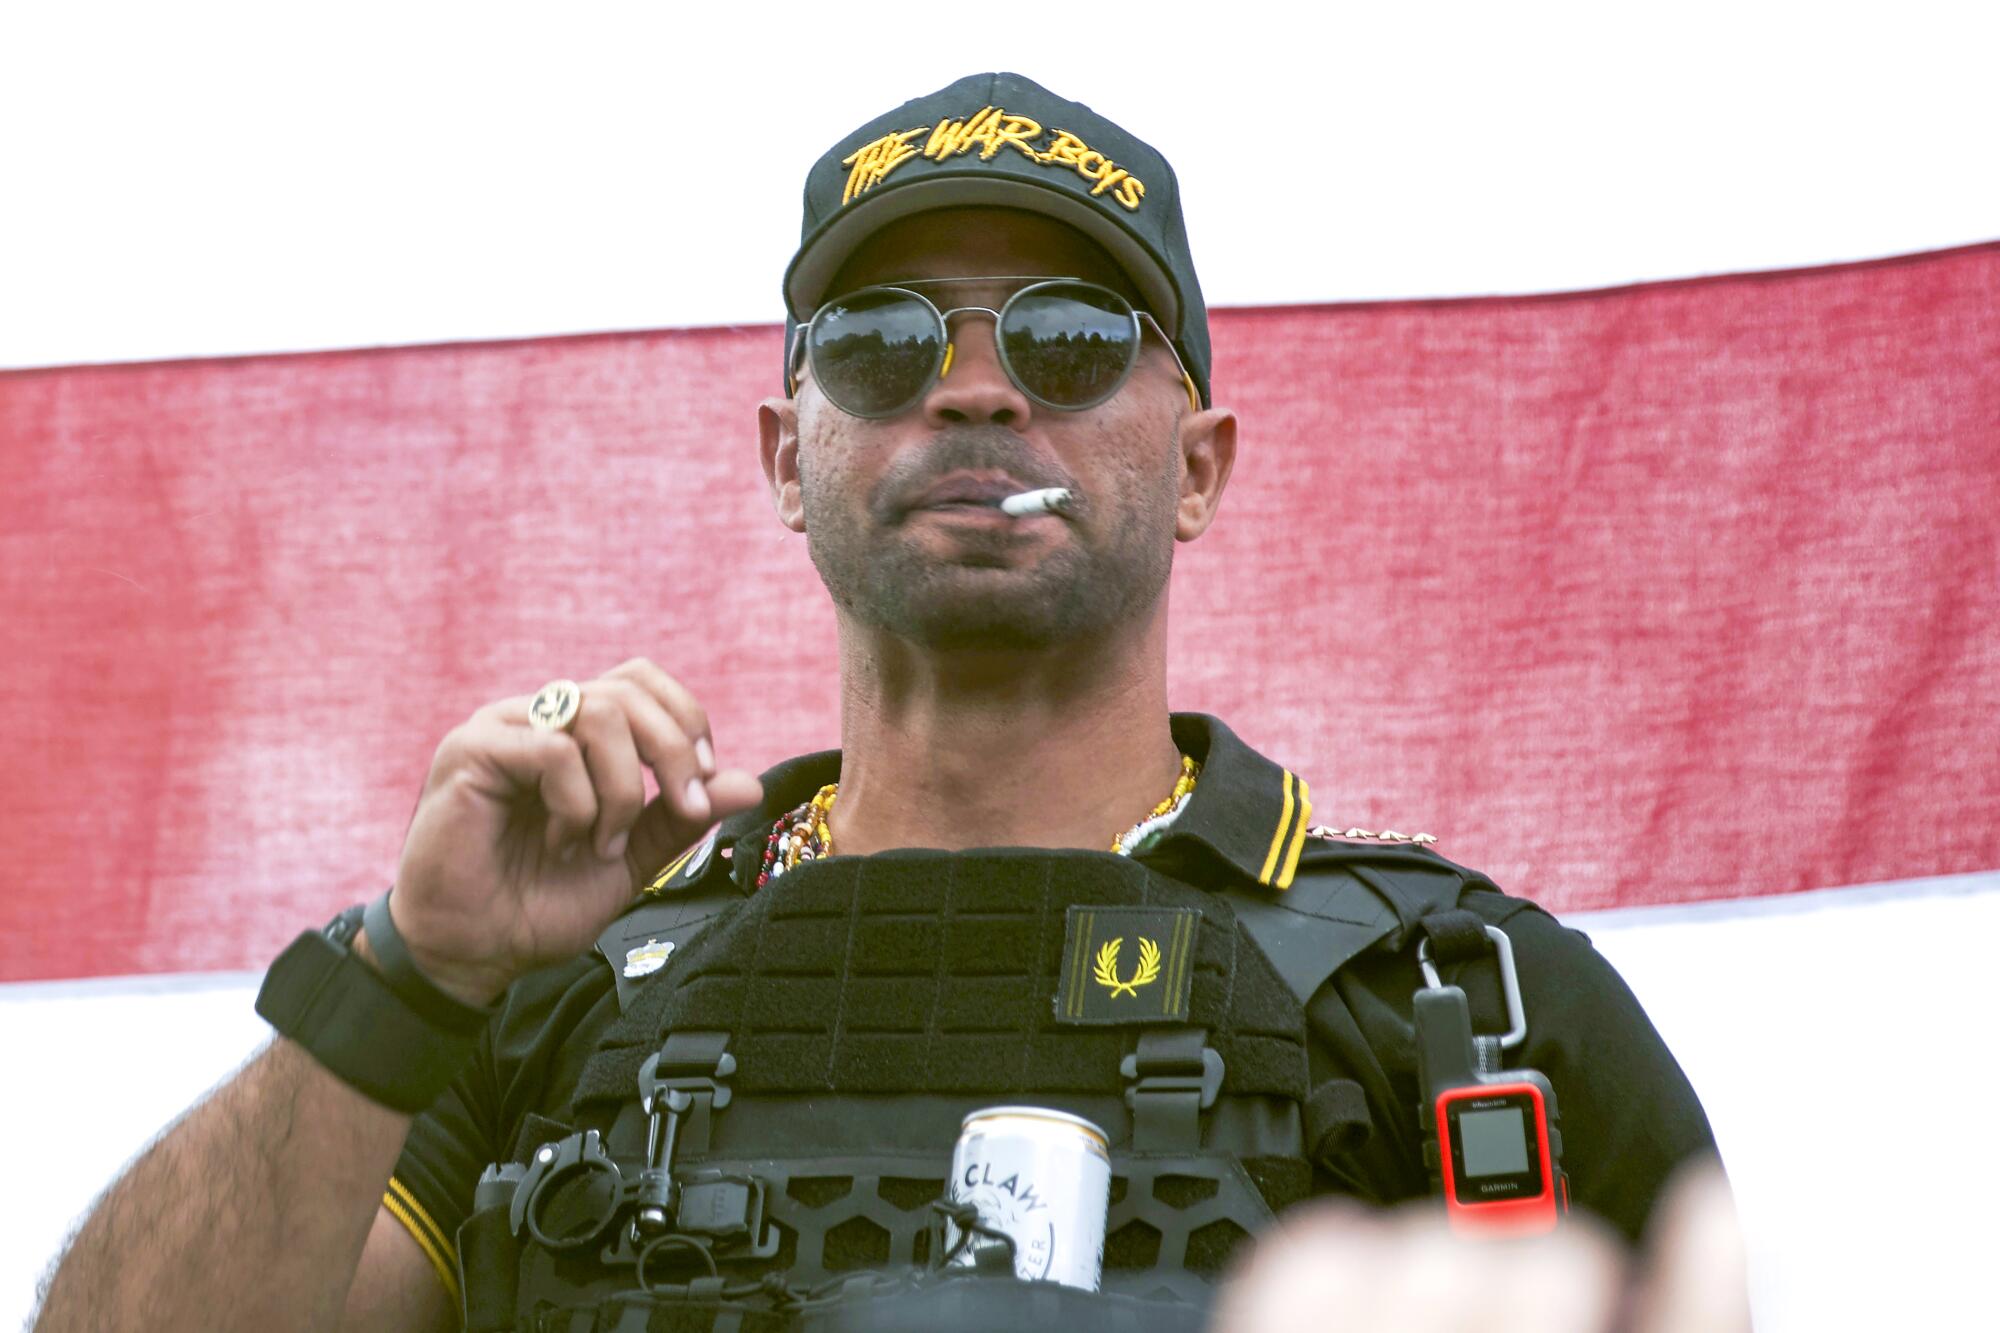 Former extremist leader Henry "Enrique" Tarrio smokes while wearing a tactical vest and hat that reads "The War Boys"